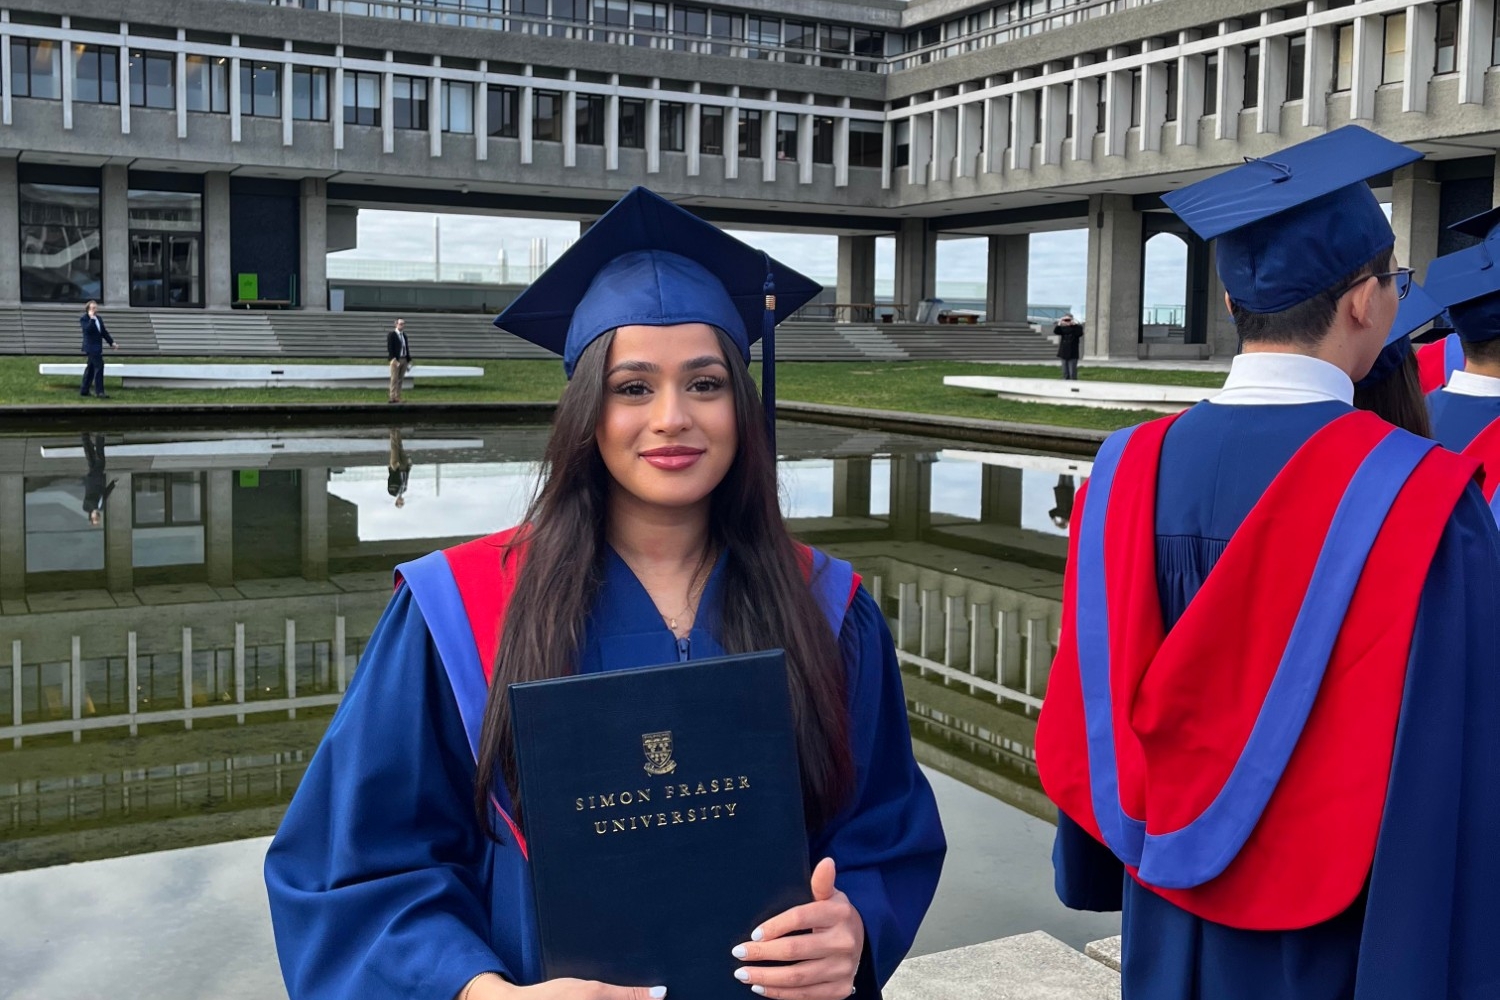 Marihah Hussainaly Farook in full regalia at her convocation holding her parchment as she poses in front of SFU's reflection pond.